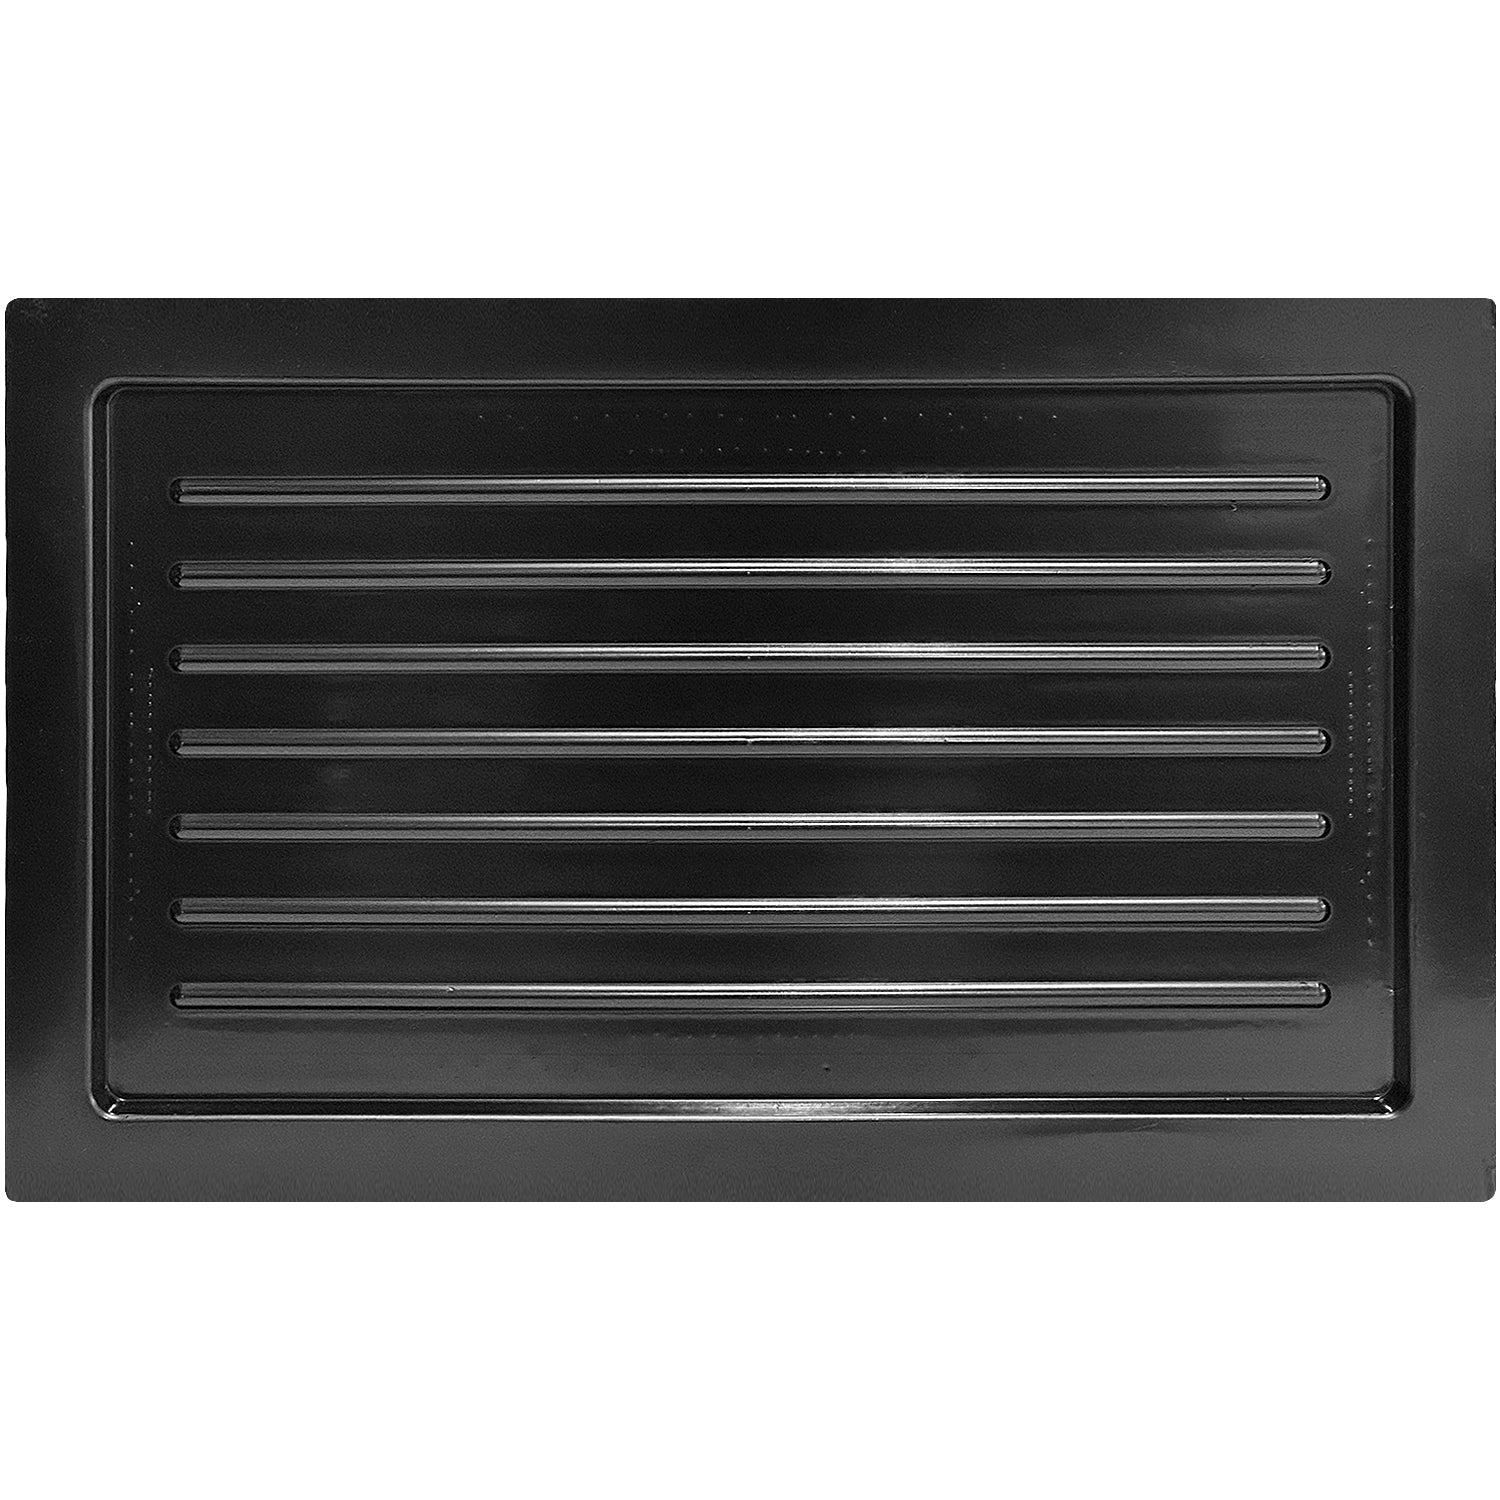 Back of large outward mounted vent cover (black)